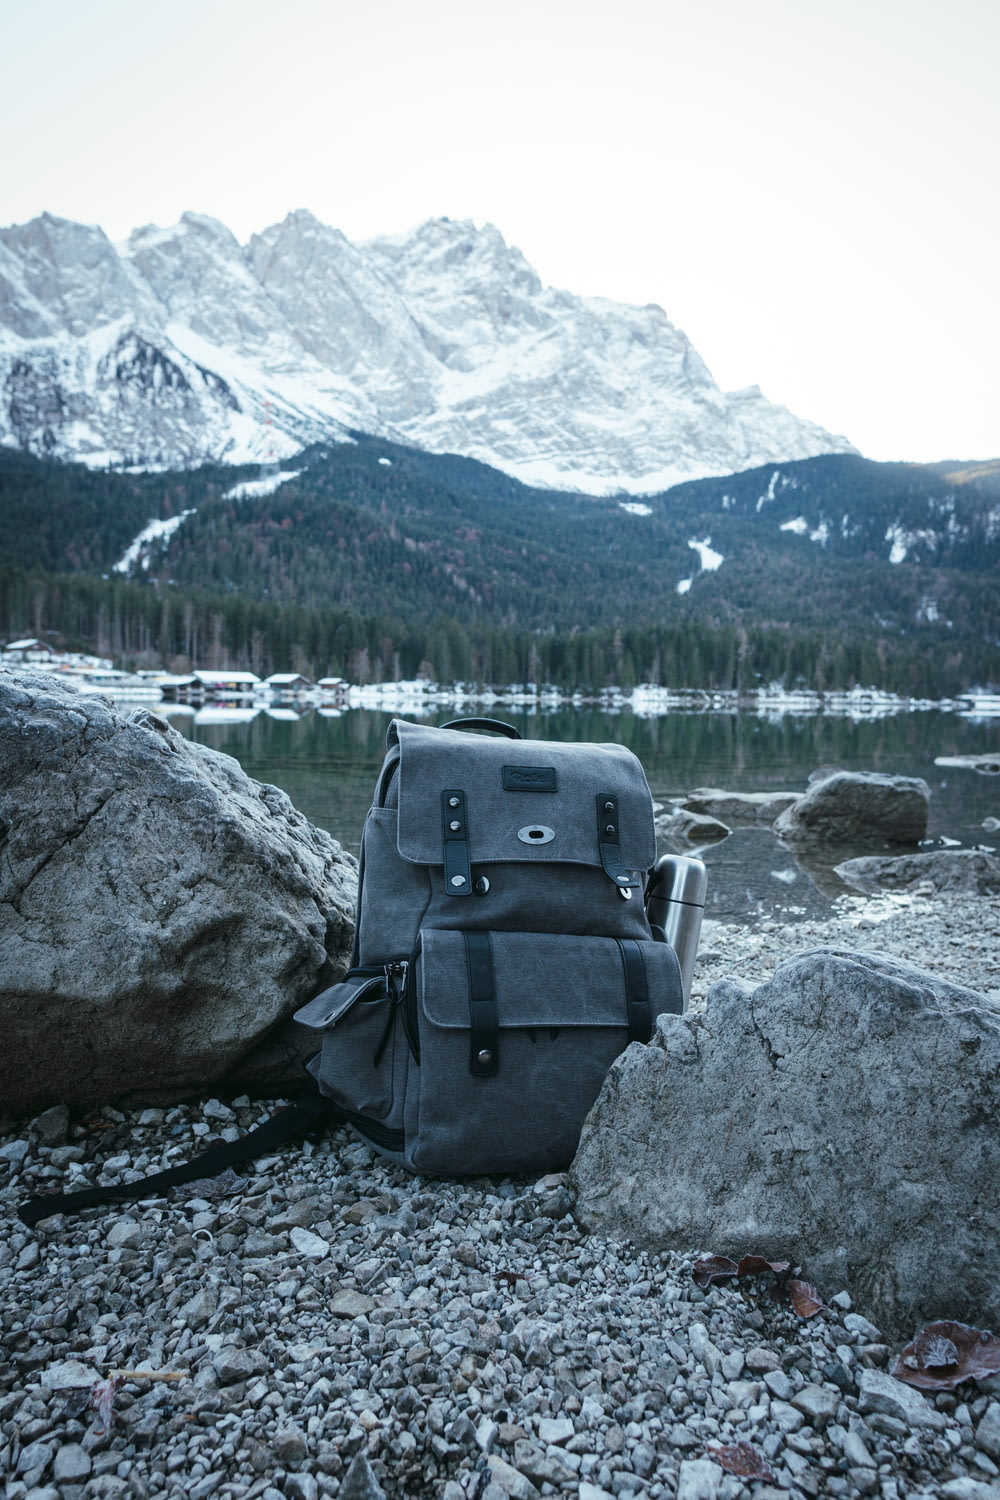 blue and gray backpack on gray rock near body of water during daytime